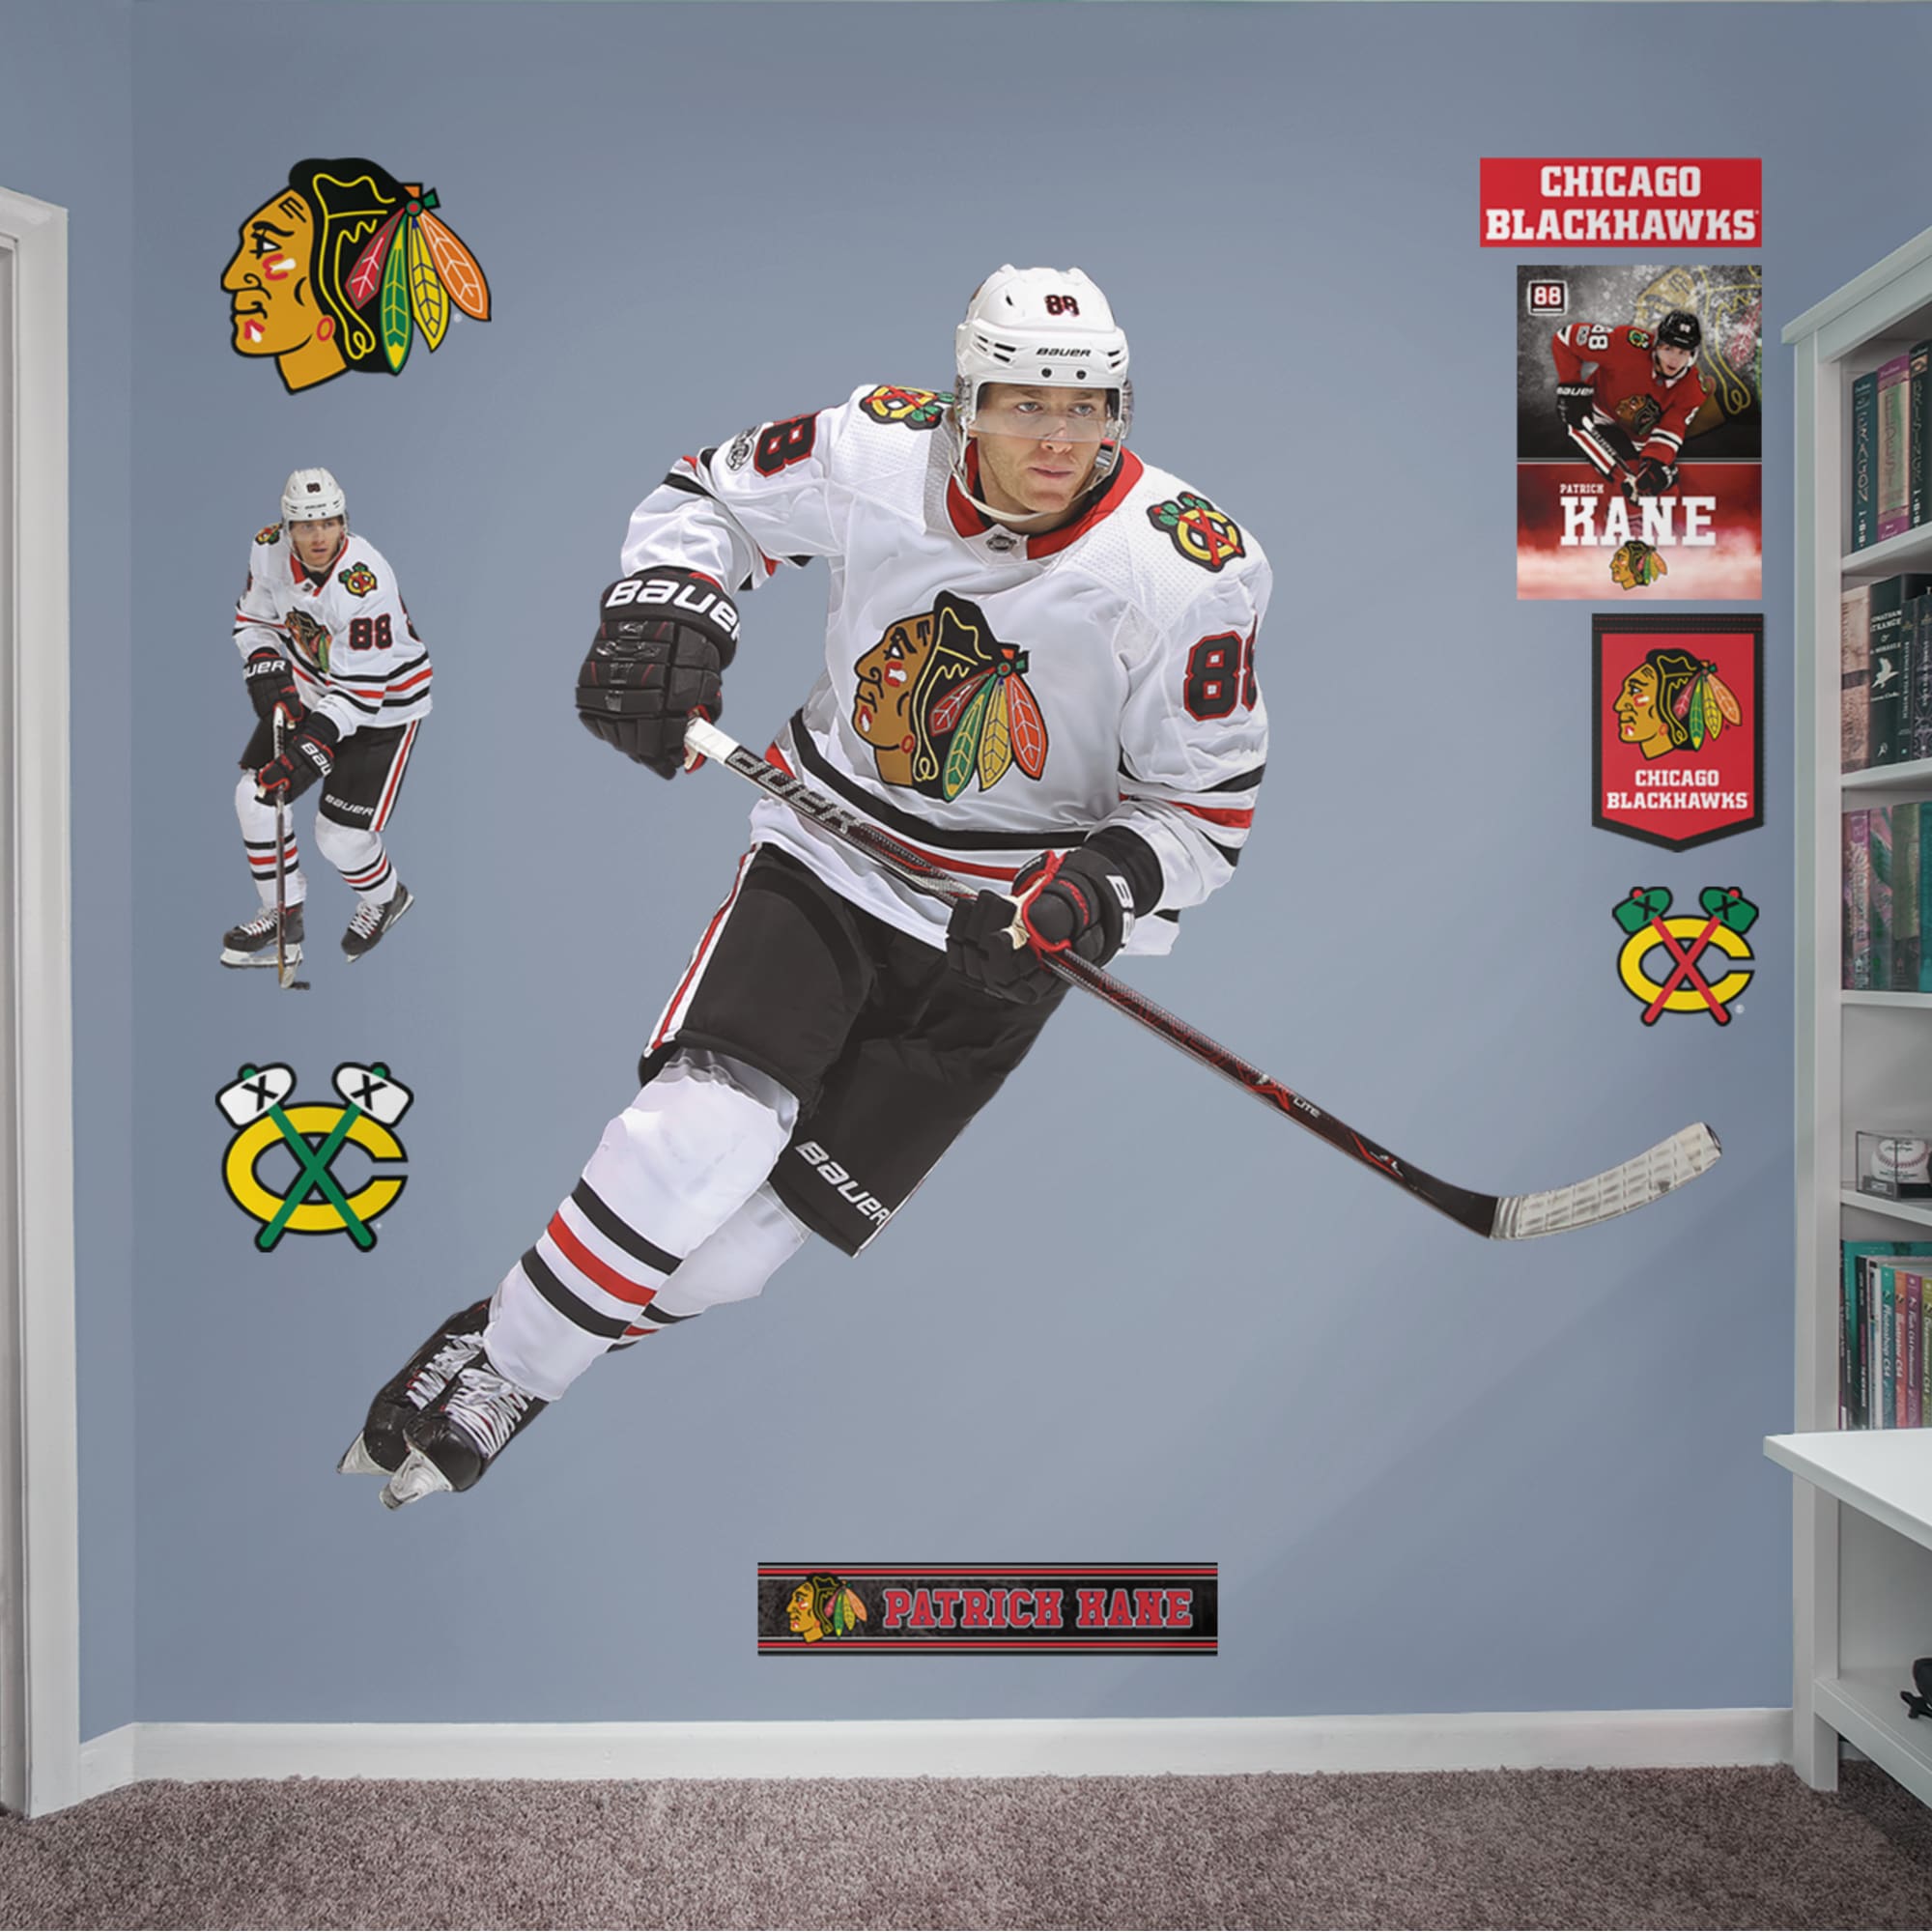 Patrick Kane for Chicago Blackhawks - Officially Licensed NHL Removable Wall Decal Life-Size Athlete + 9 Decals (78"W x 70"H) by